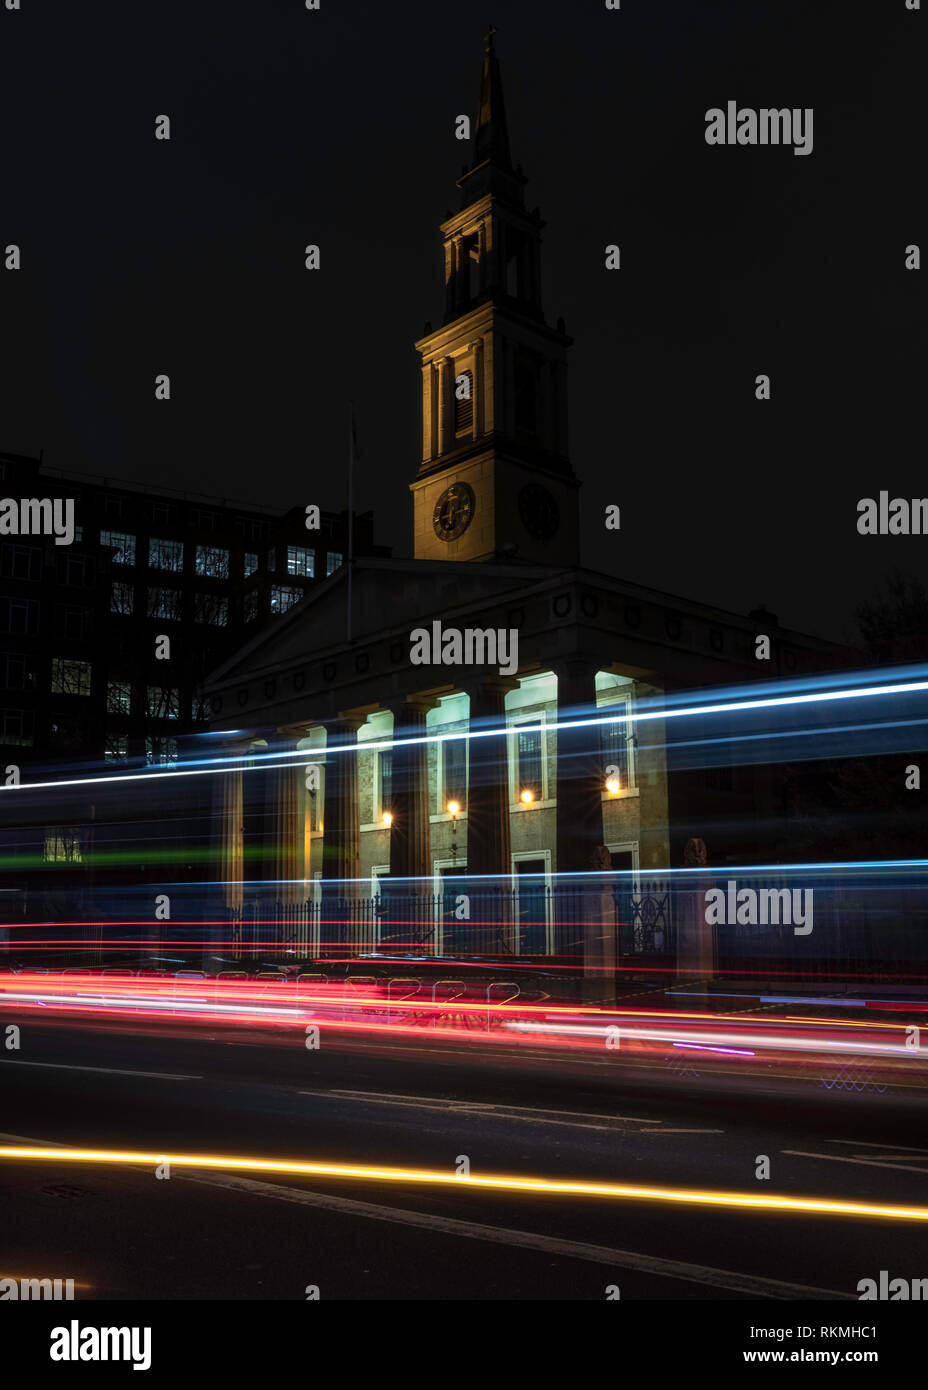 St Johns Church at night in London on Waterloo Road. Stock Photo